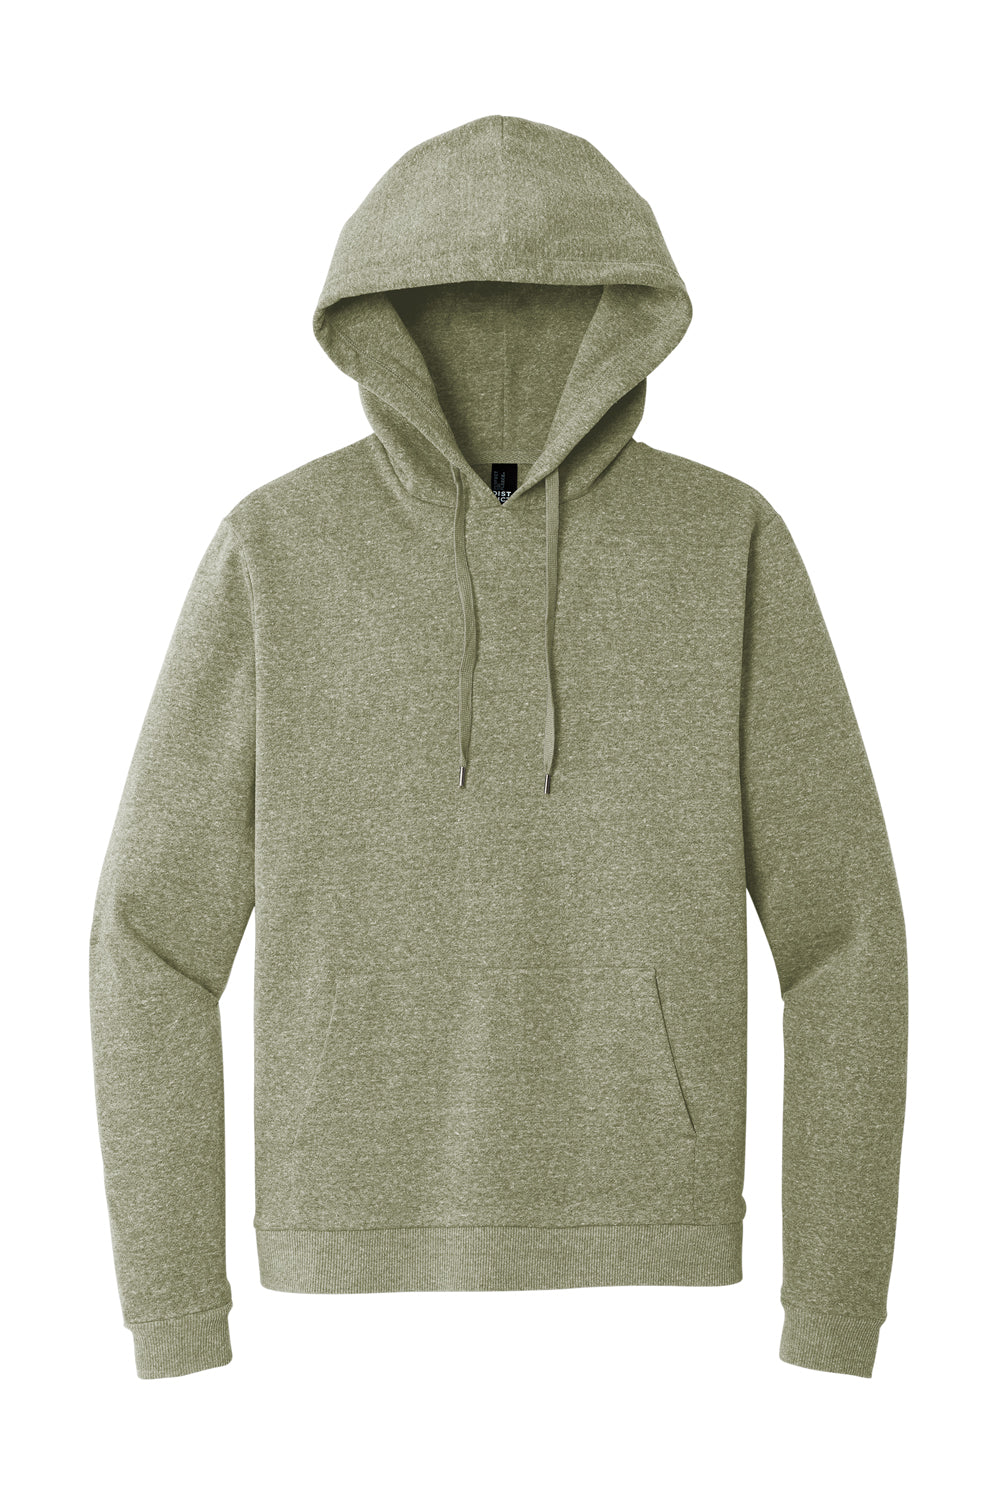 District DT1300 Mens Perfect Tri Fleece Hooded Sweatshirt Hoodie Military Green Frost Flat Front